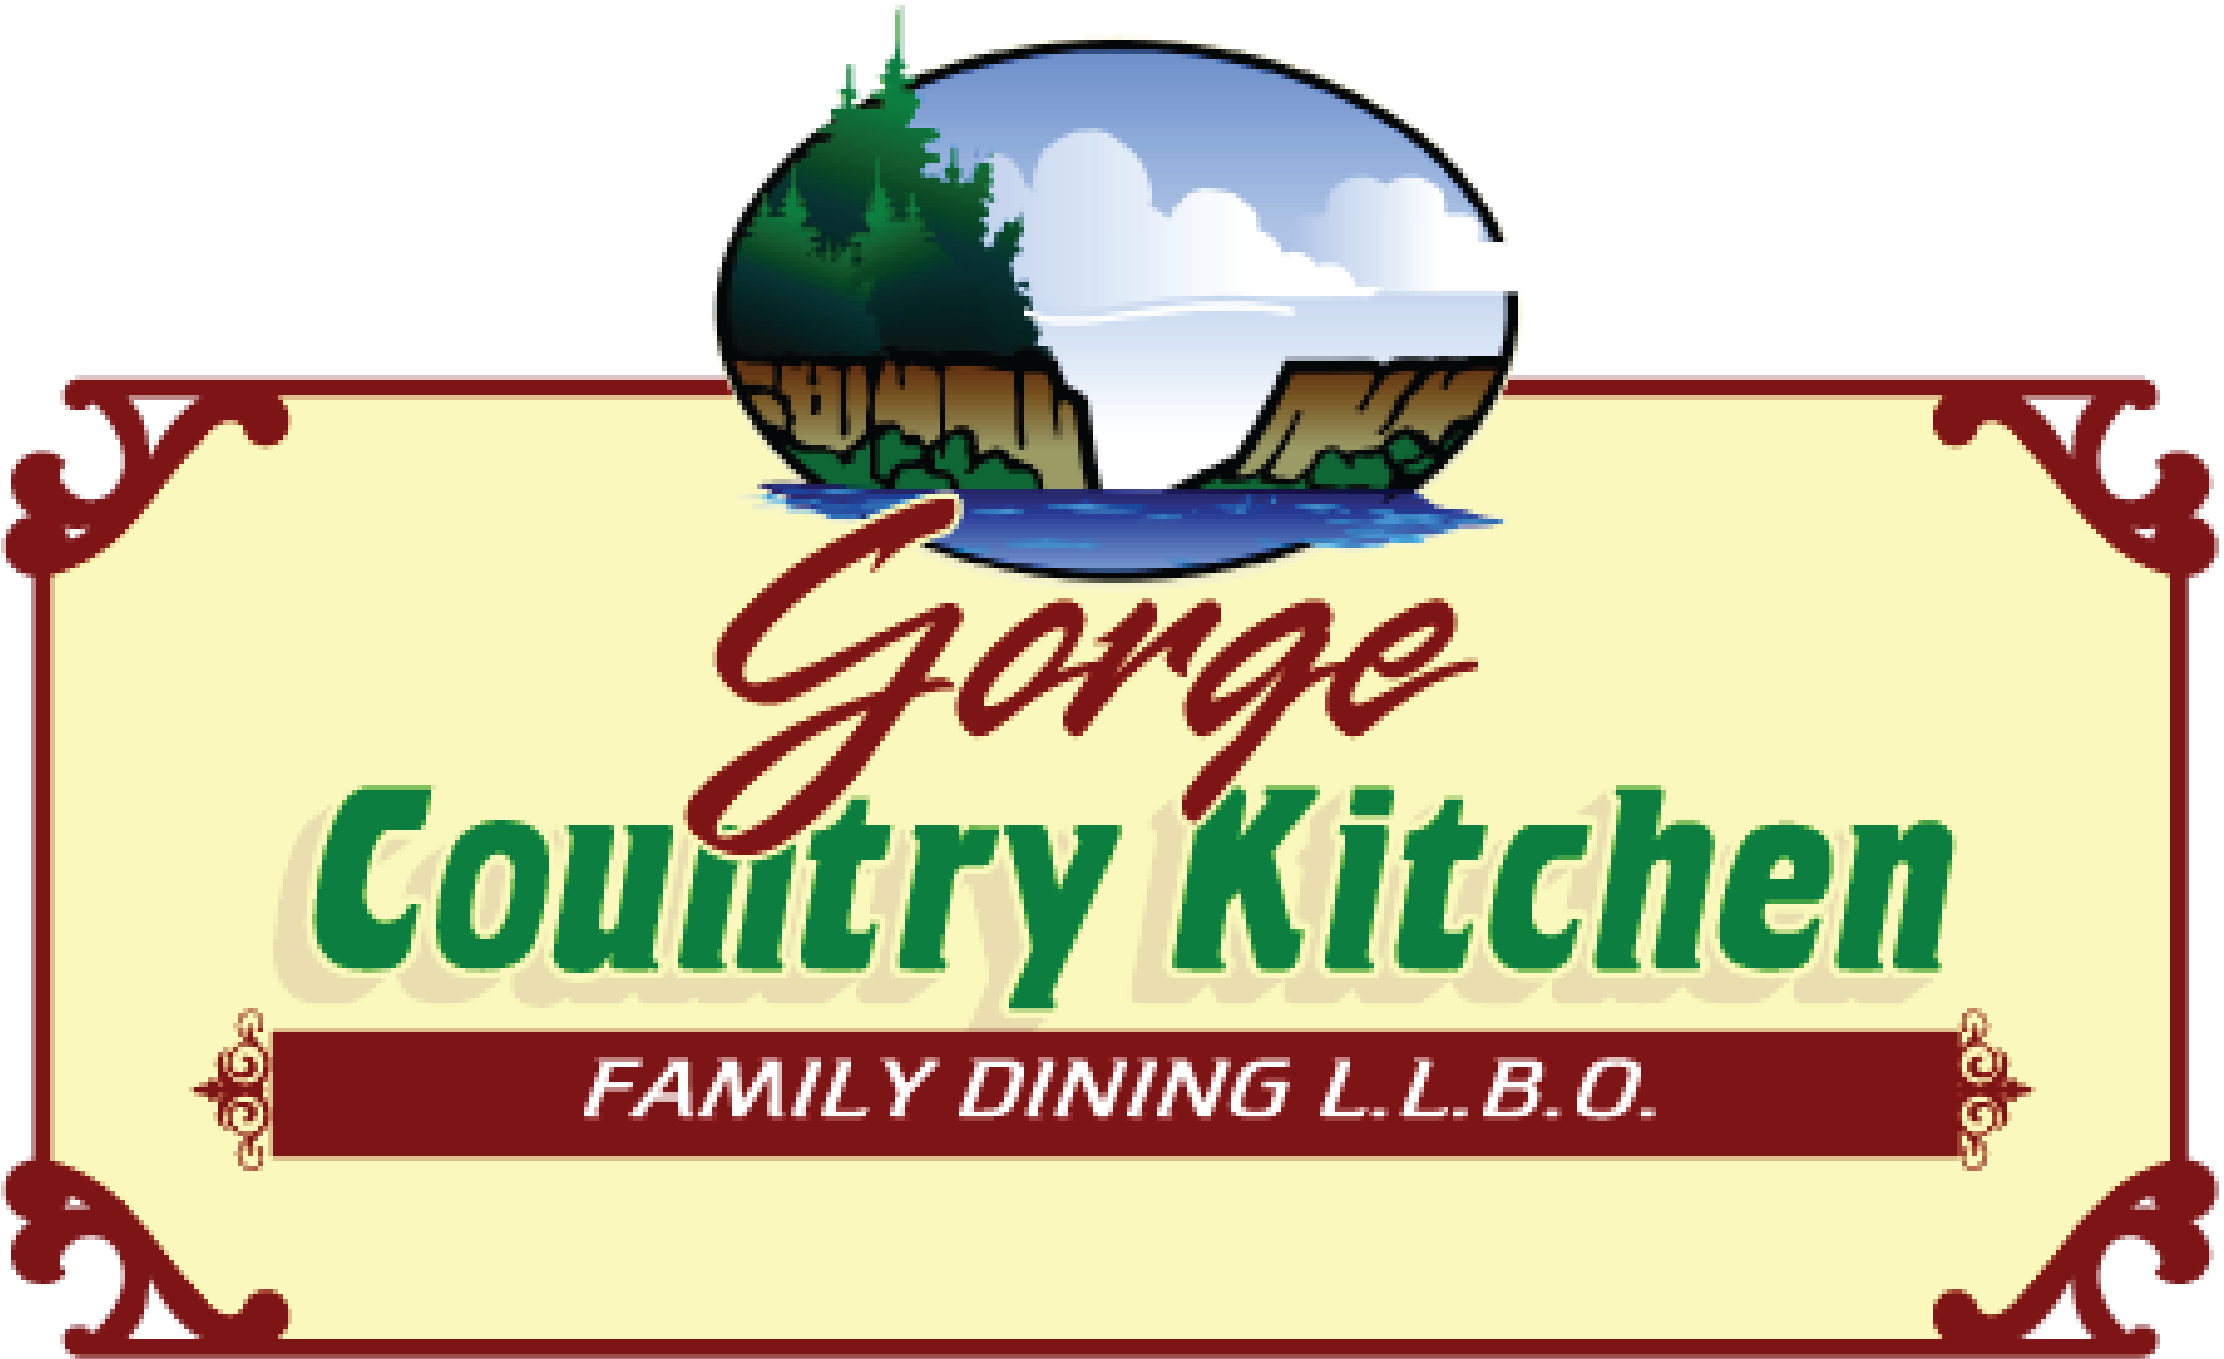 Gorge Country Kitchen